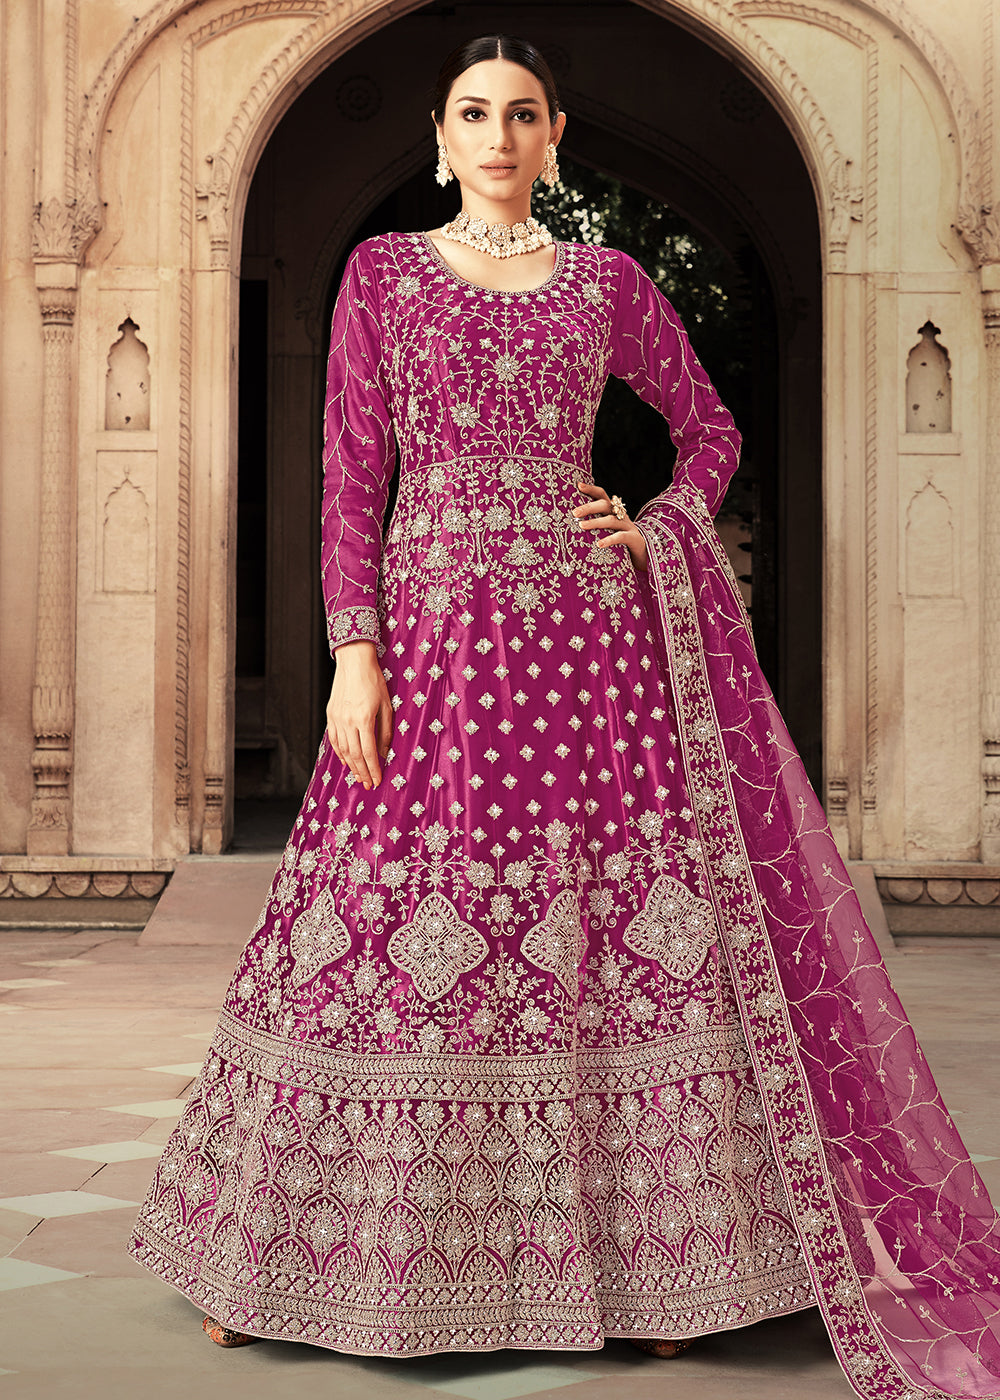 Buy Now Magenta Zarkan Diamond Embroidered Bridal Anarkali Suit Online in Canada at Empress Clothing. 